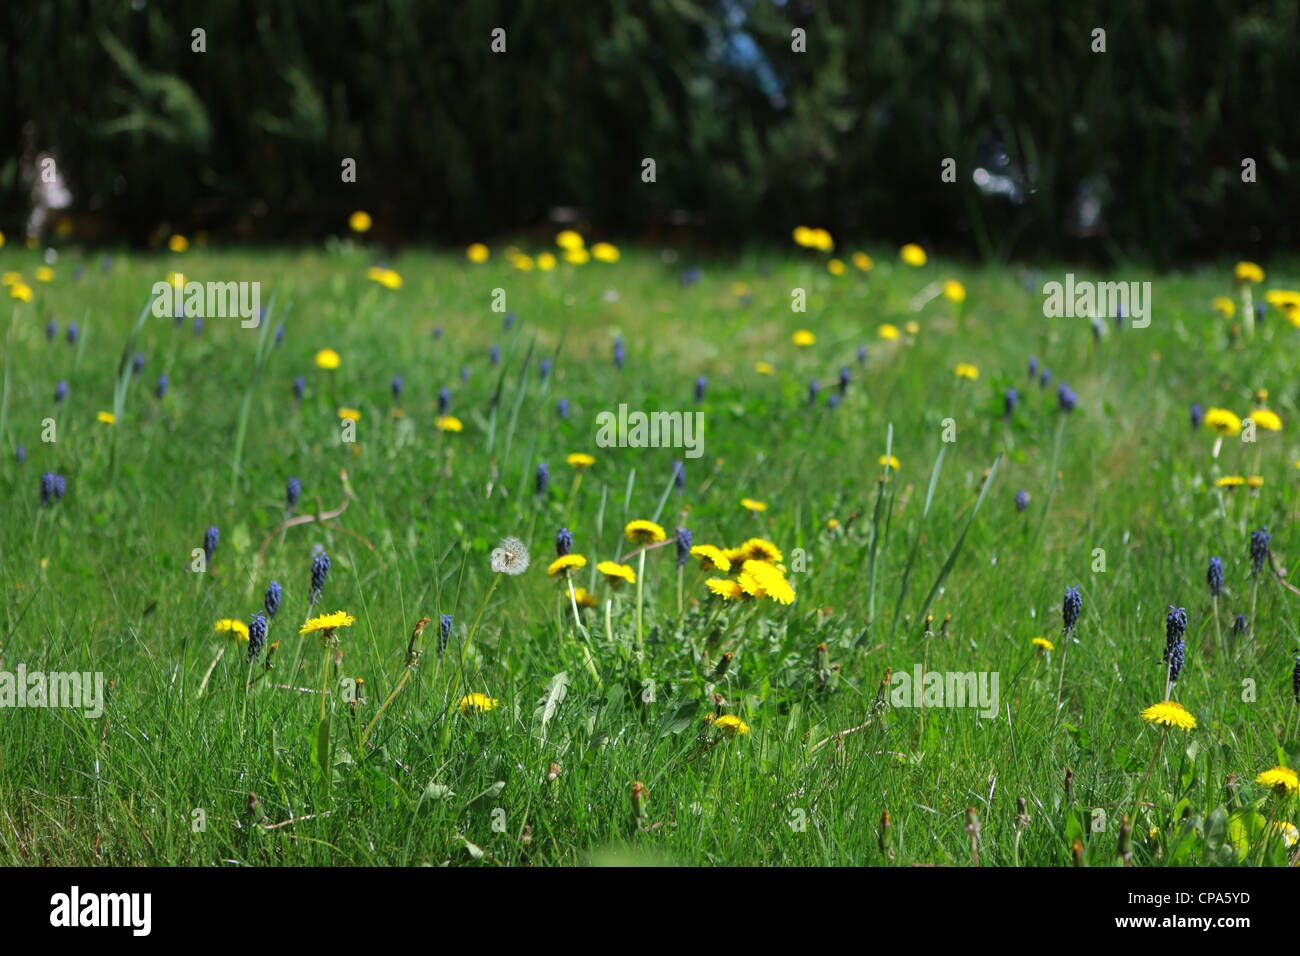 Flowering Meadow with dandalions Stock Photo